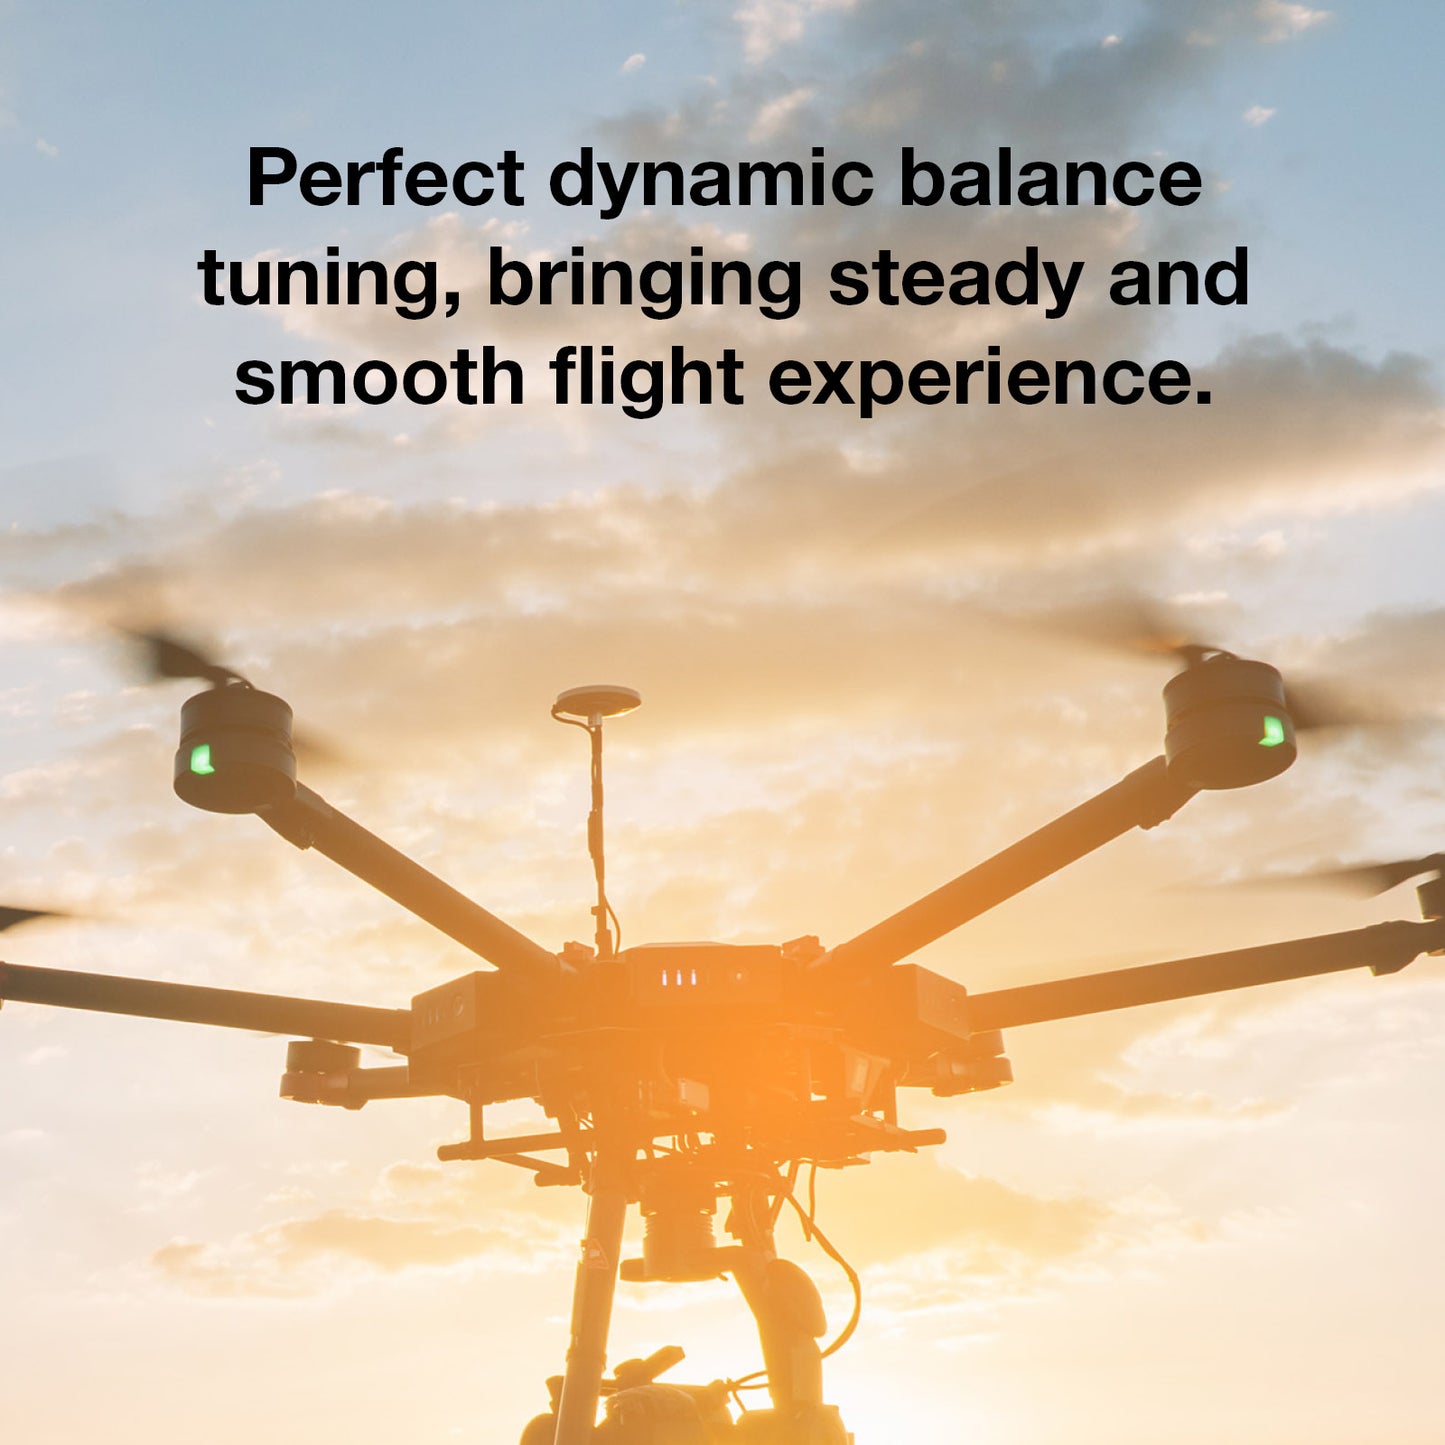 T45*20 inch Carbon Fiber CW CCW Agriculture Drone Propeller Heavy Lift Drone Paramotor Paraglider